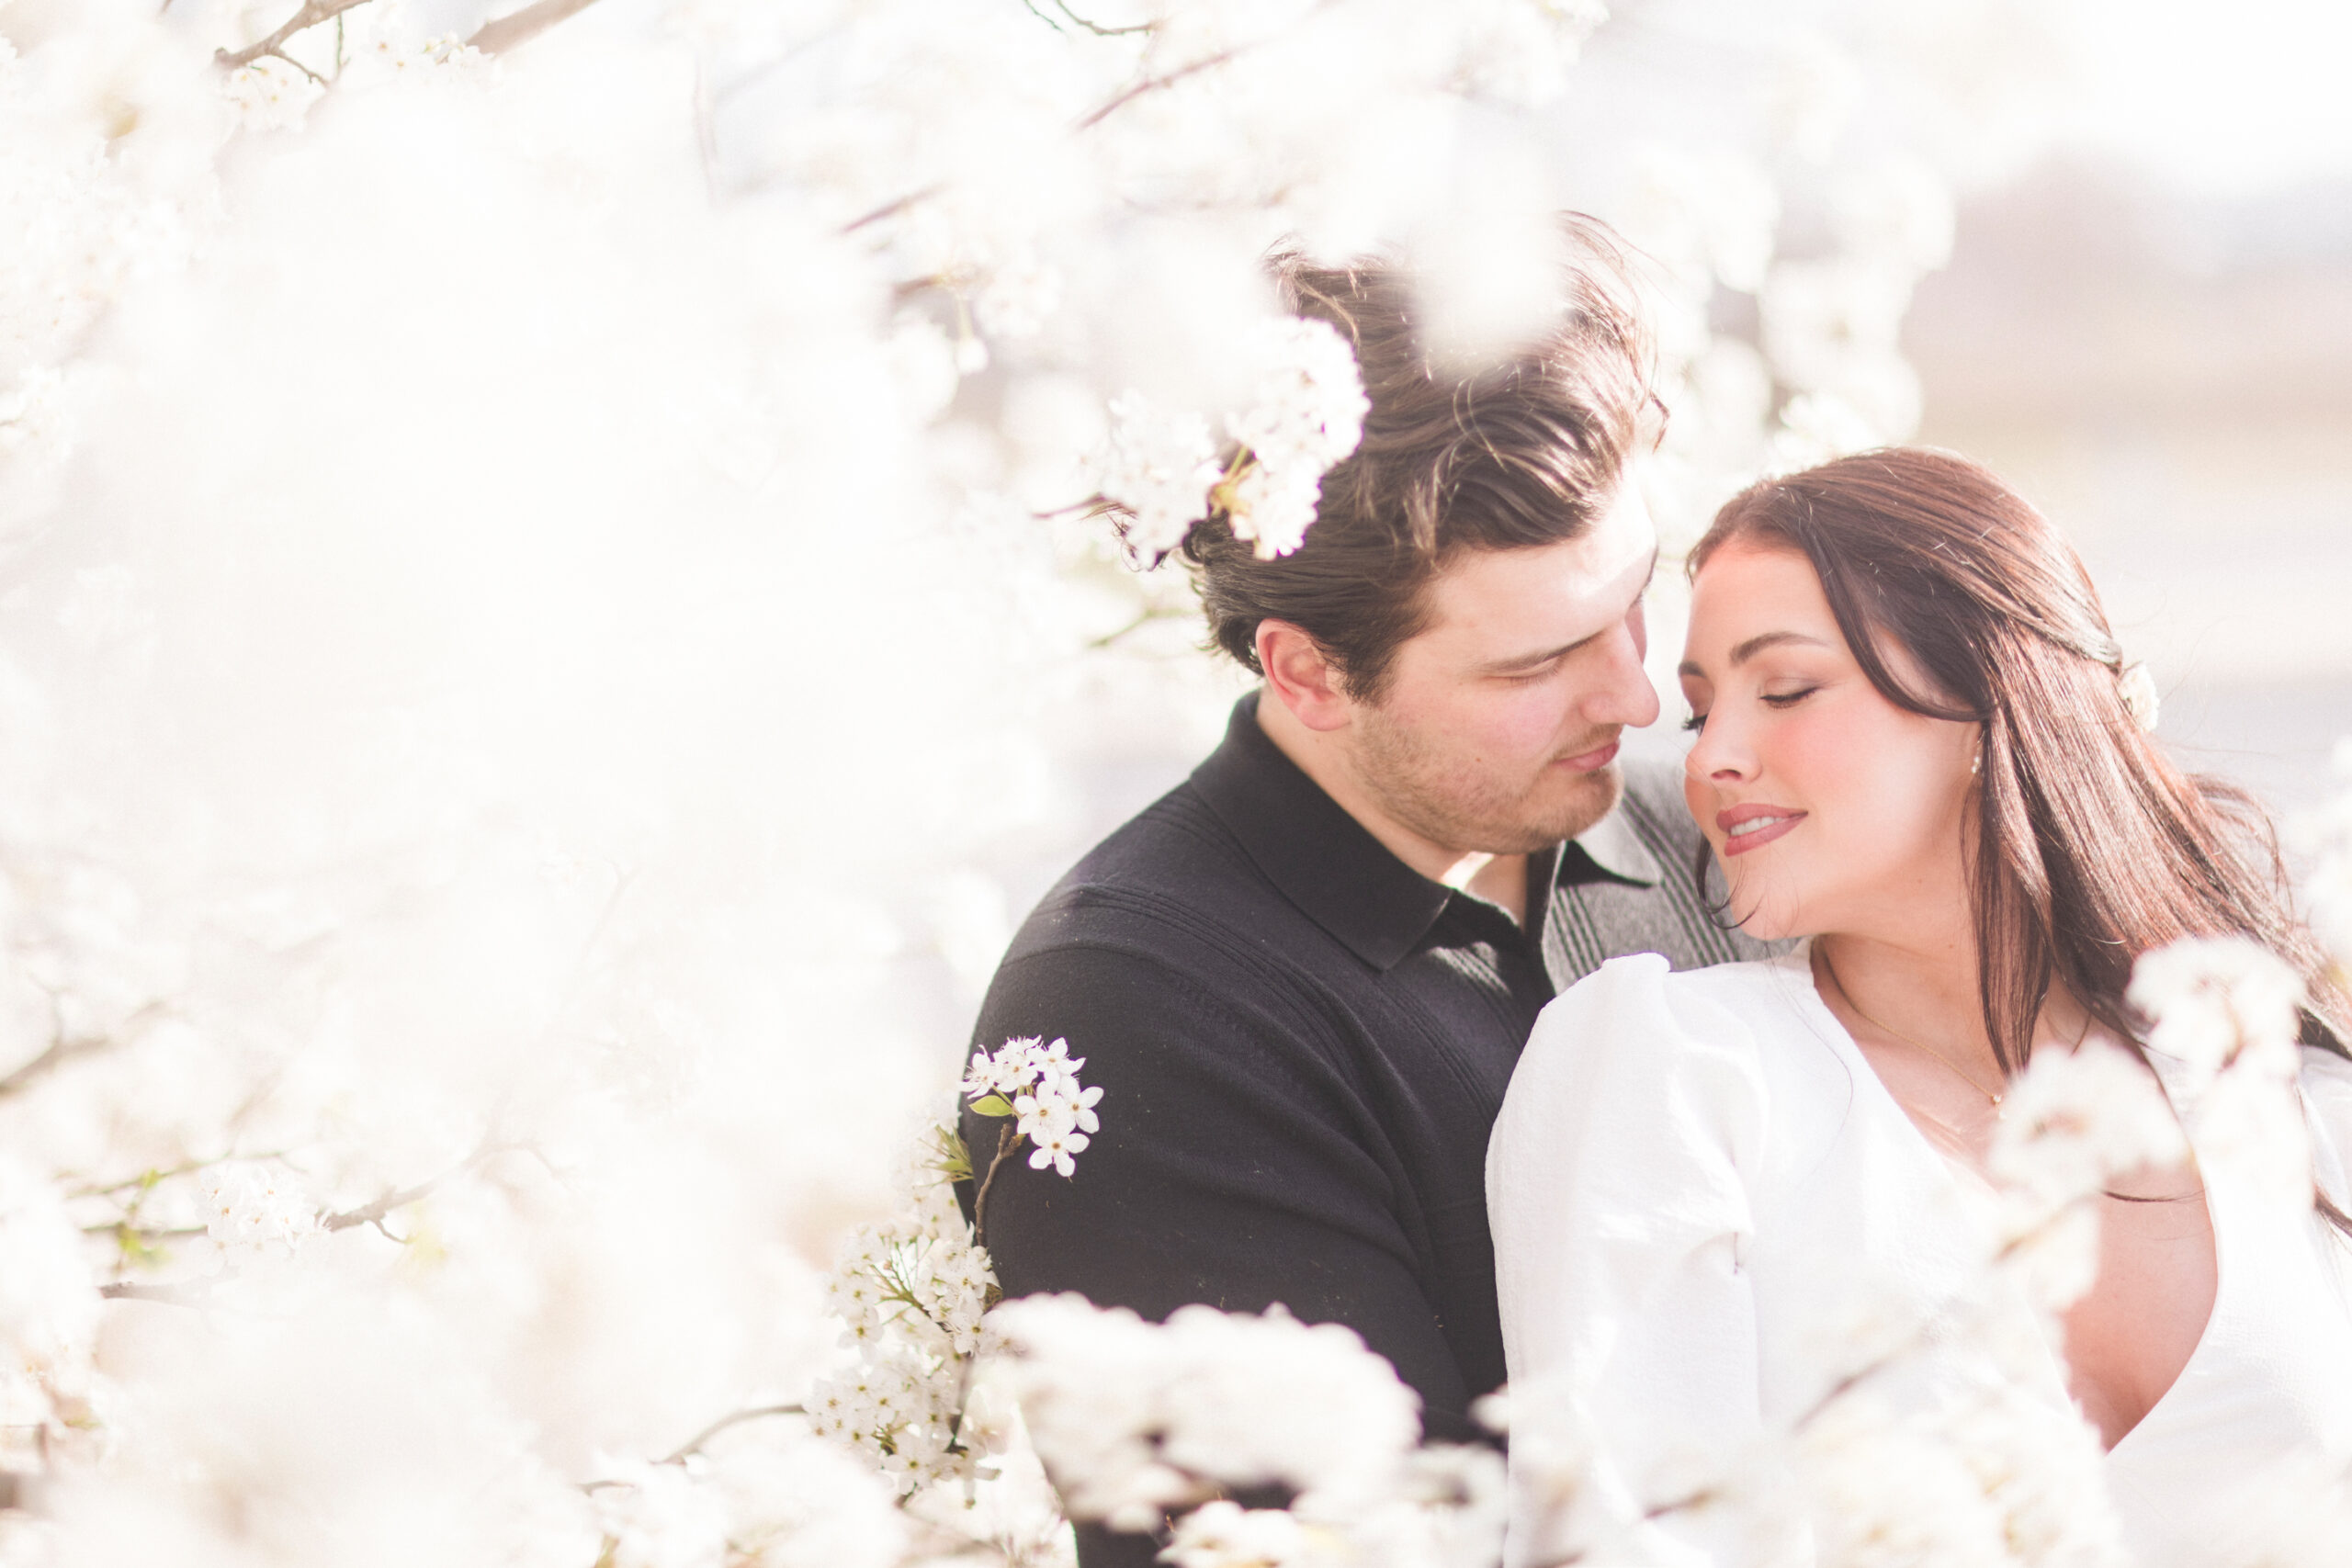 NWA engagement photos with bradford pear trees in full bloom as the bride and groom to be take romantic photographs.